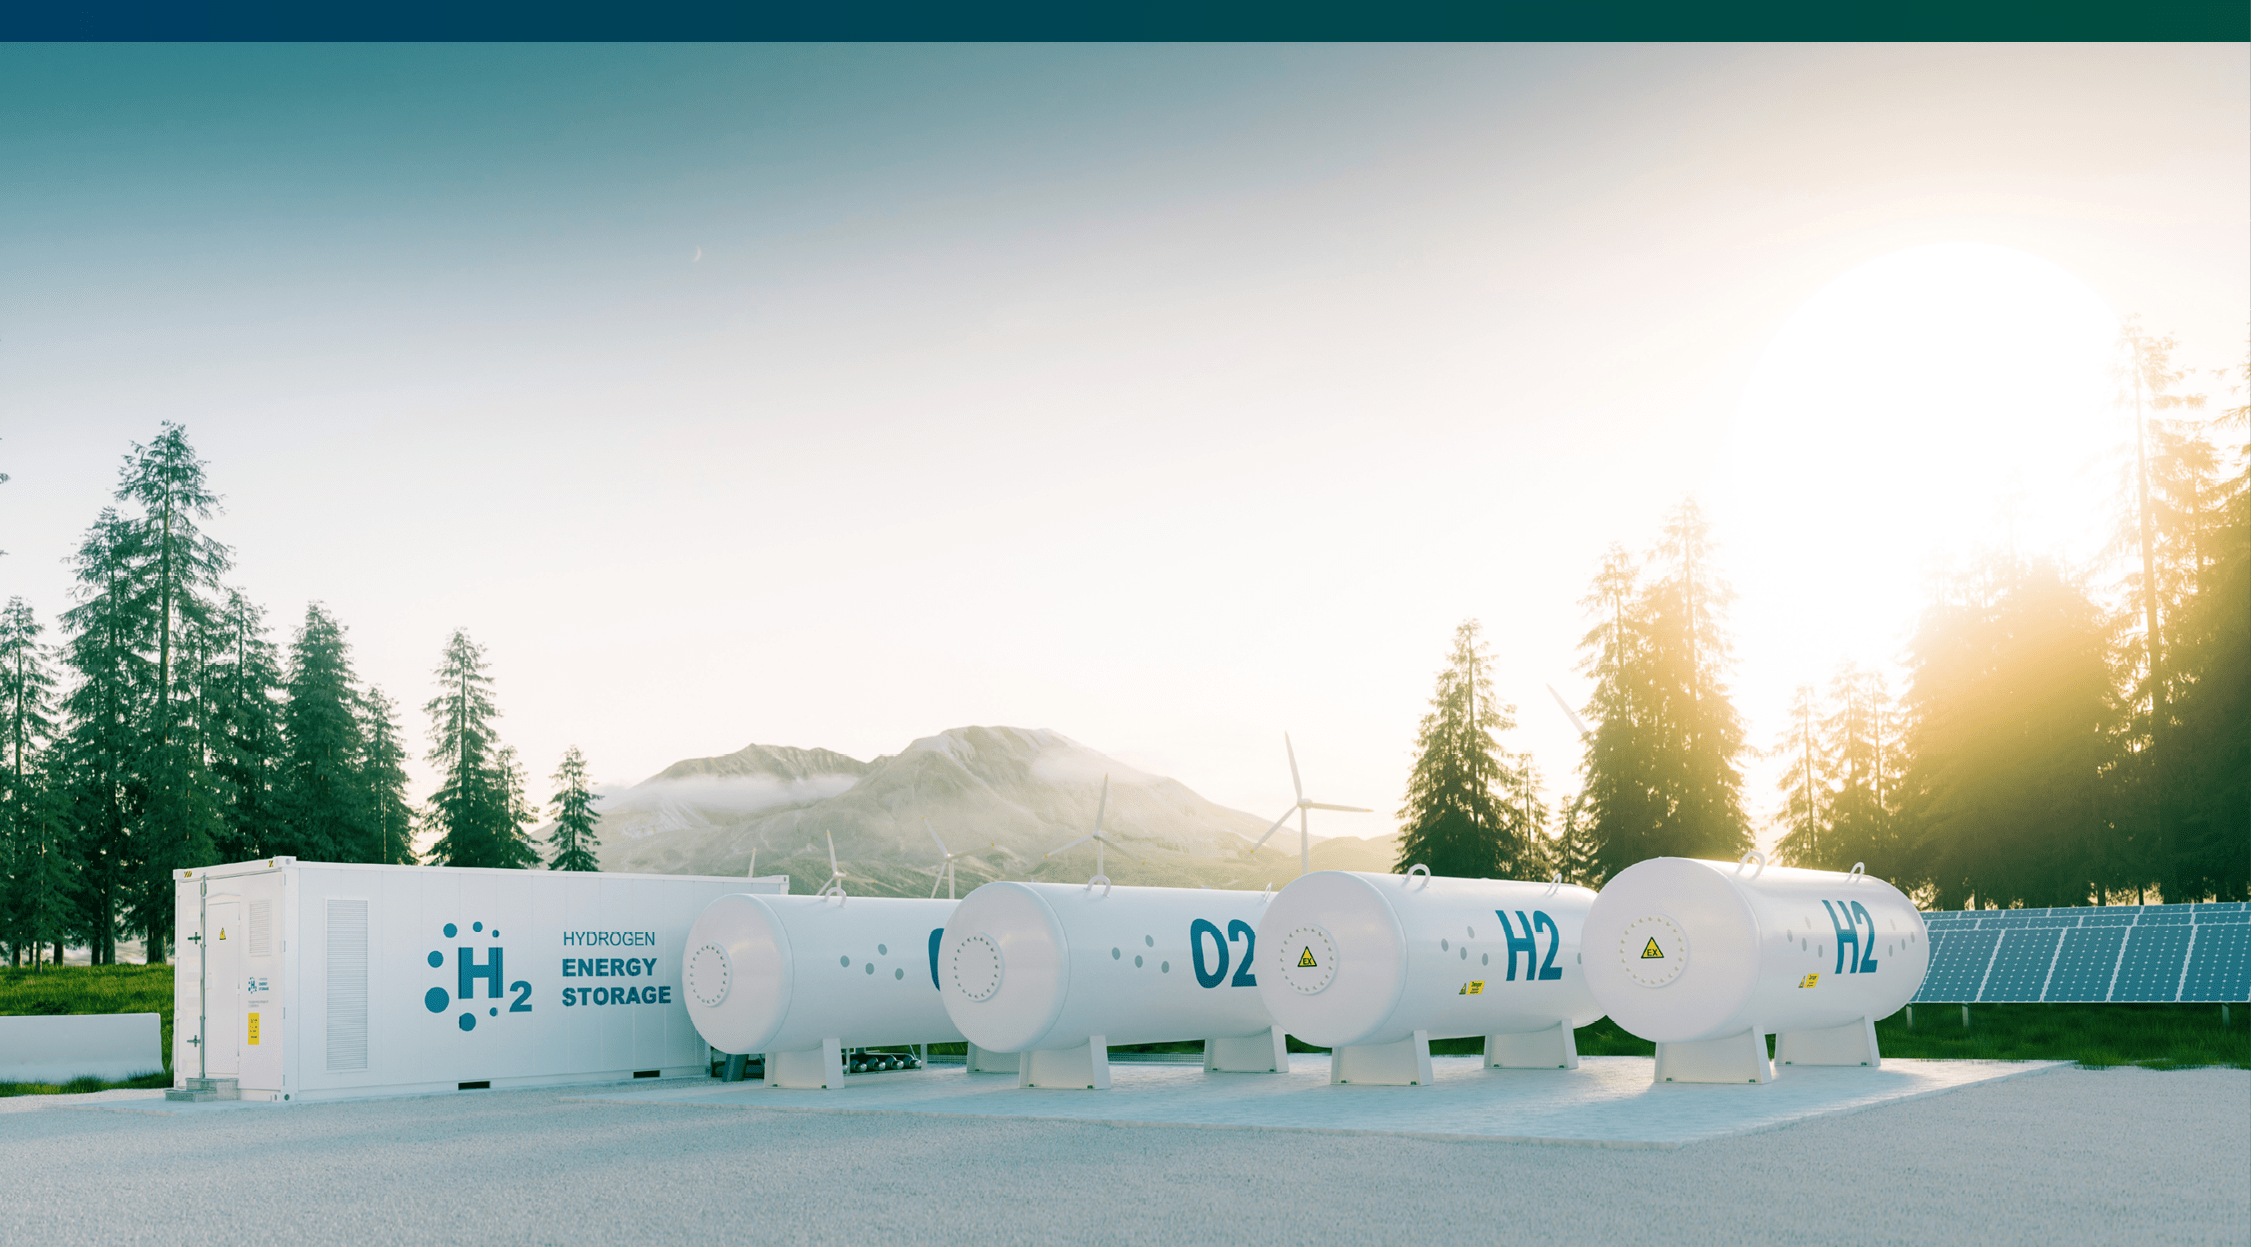 Modern container hydrogen energy storage power plant system accompanied with solar panels and wind turbine system situated in nature with Mount St. Helens in background. 3d rendering.